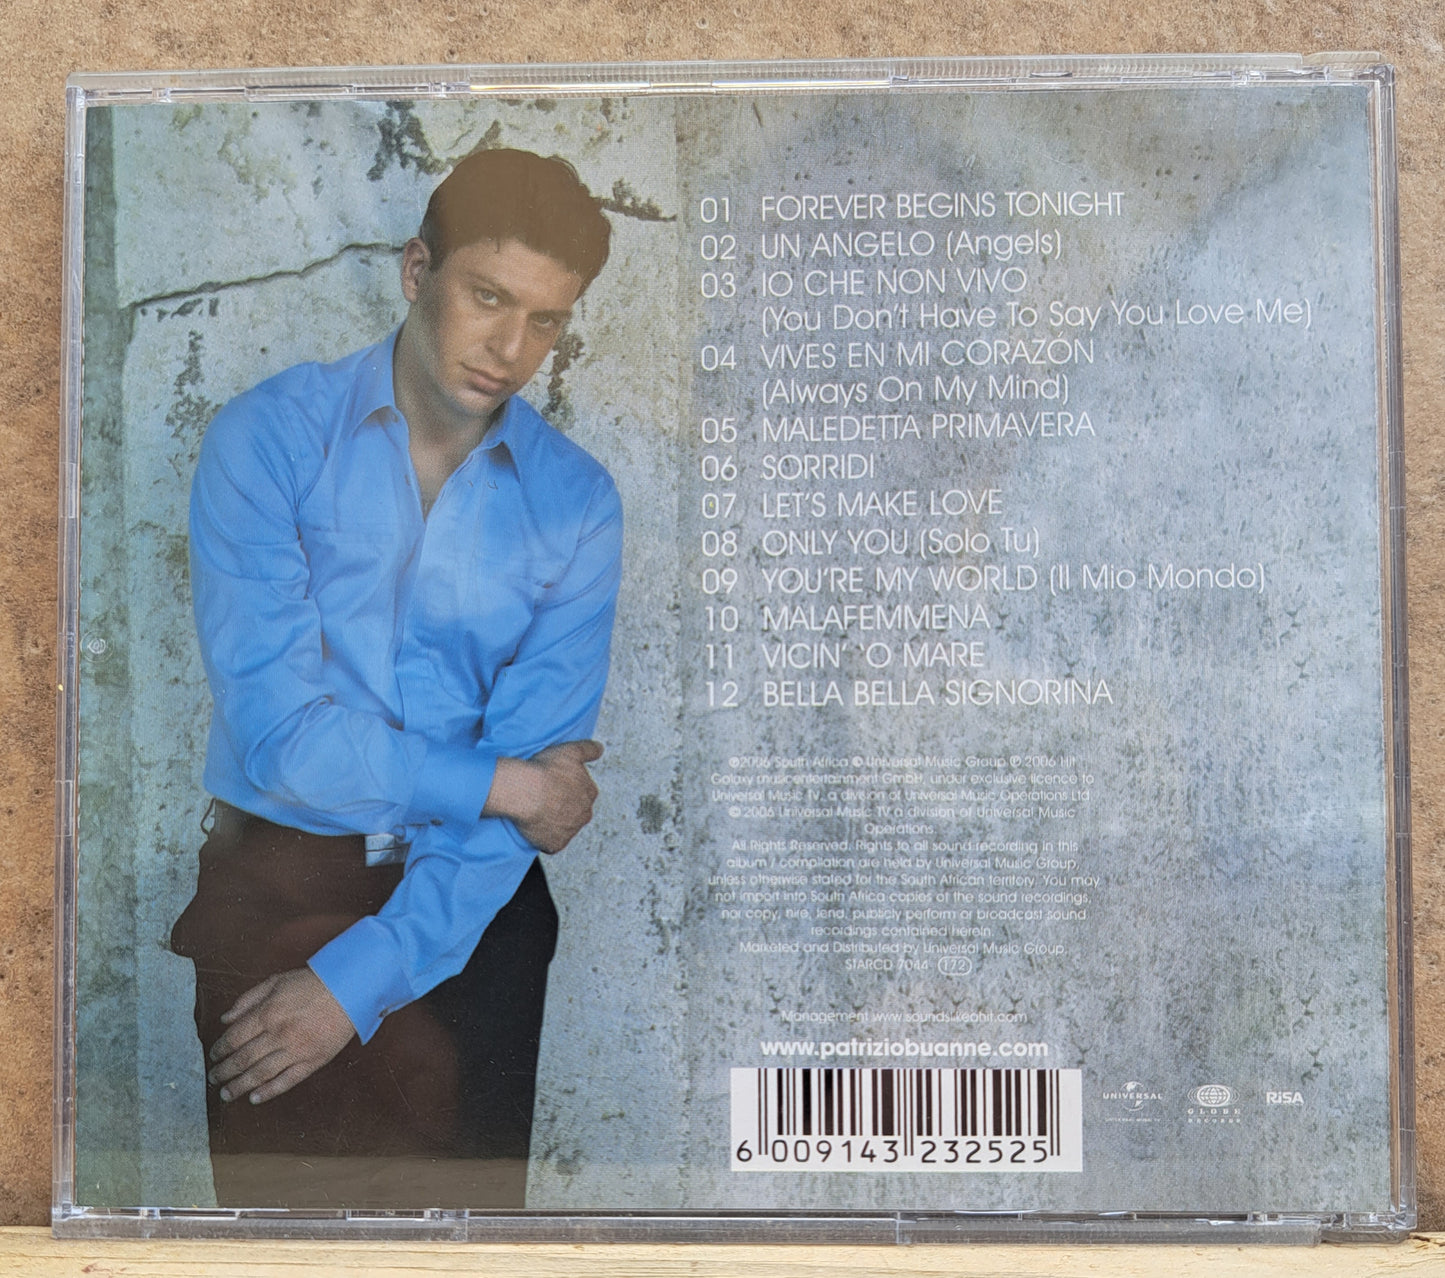 Patrizio Buanne - Forever begins tonight (cd)